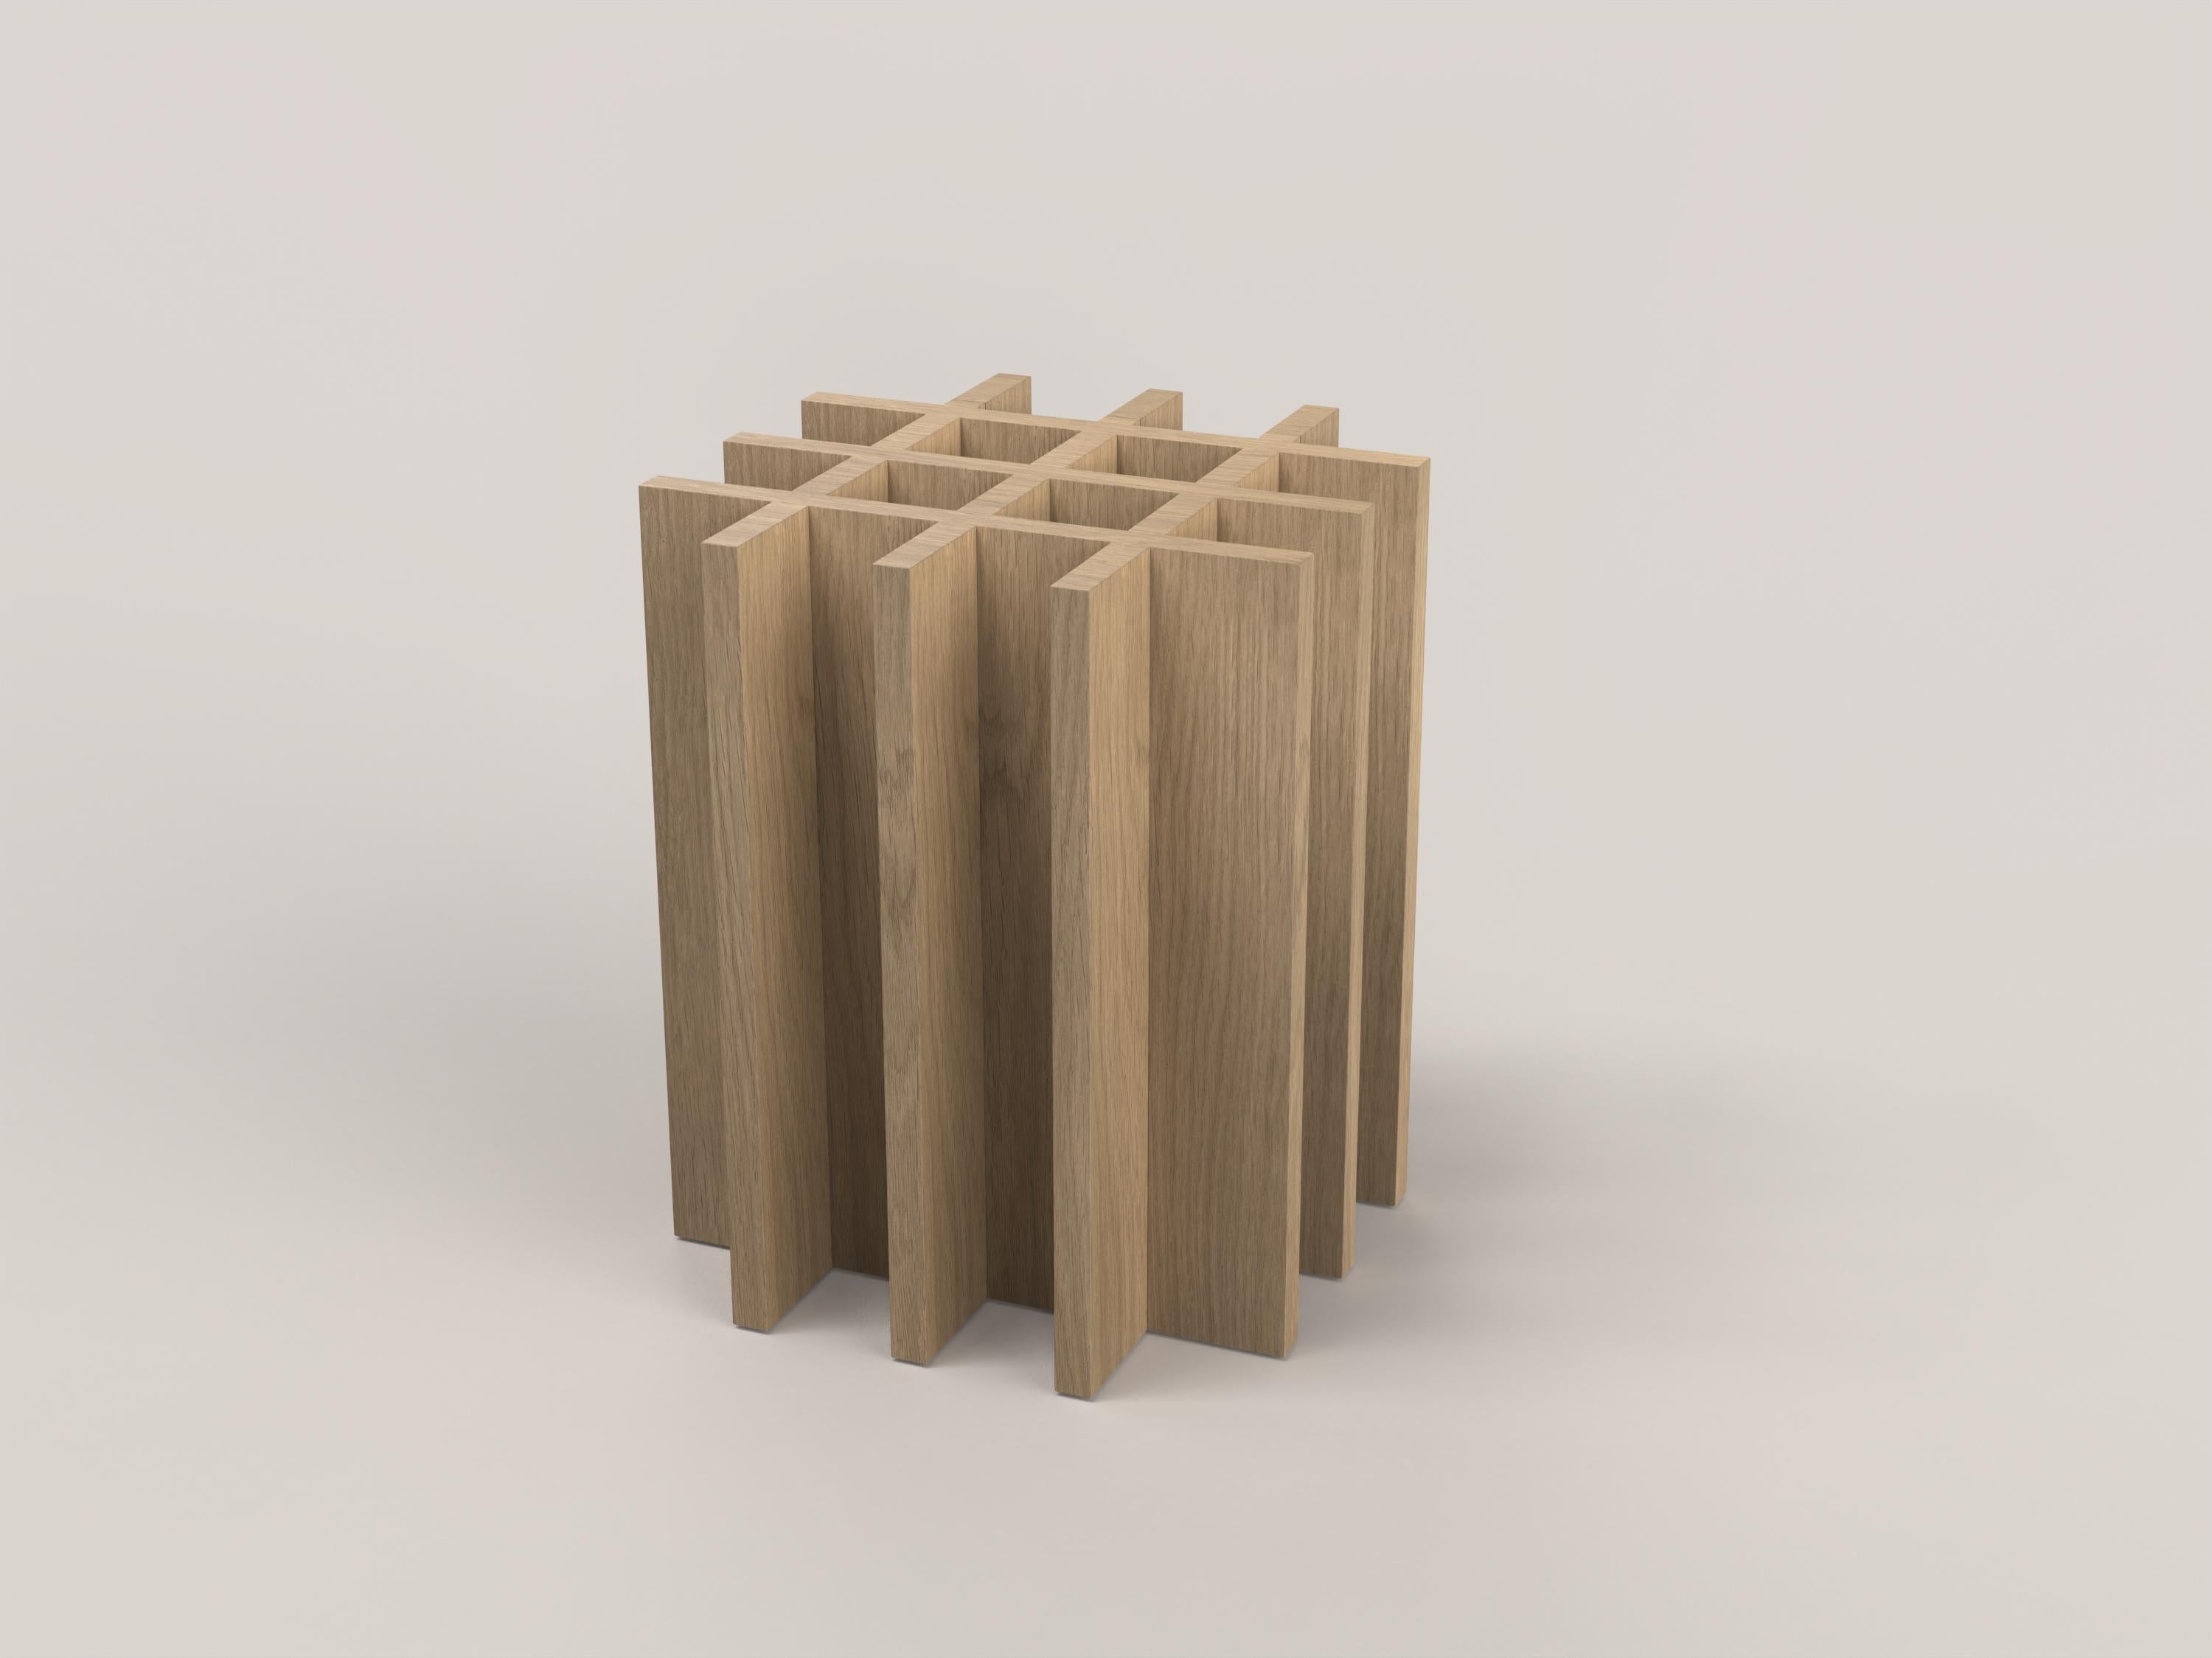 Arca V1 Stool by Edizione Limitata
Limited edition of 150. Signed and numbered.
Dimensions: D 35 x W 35 x H 42 cm.
Materials: Solid oak wood.

These contemporary solid wood pieces are manufactured by the excellence of Italian craftmanship. It is